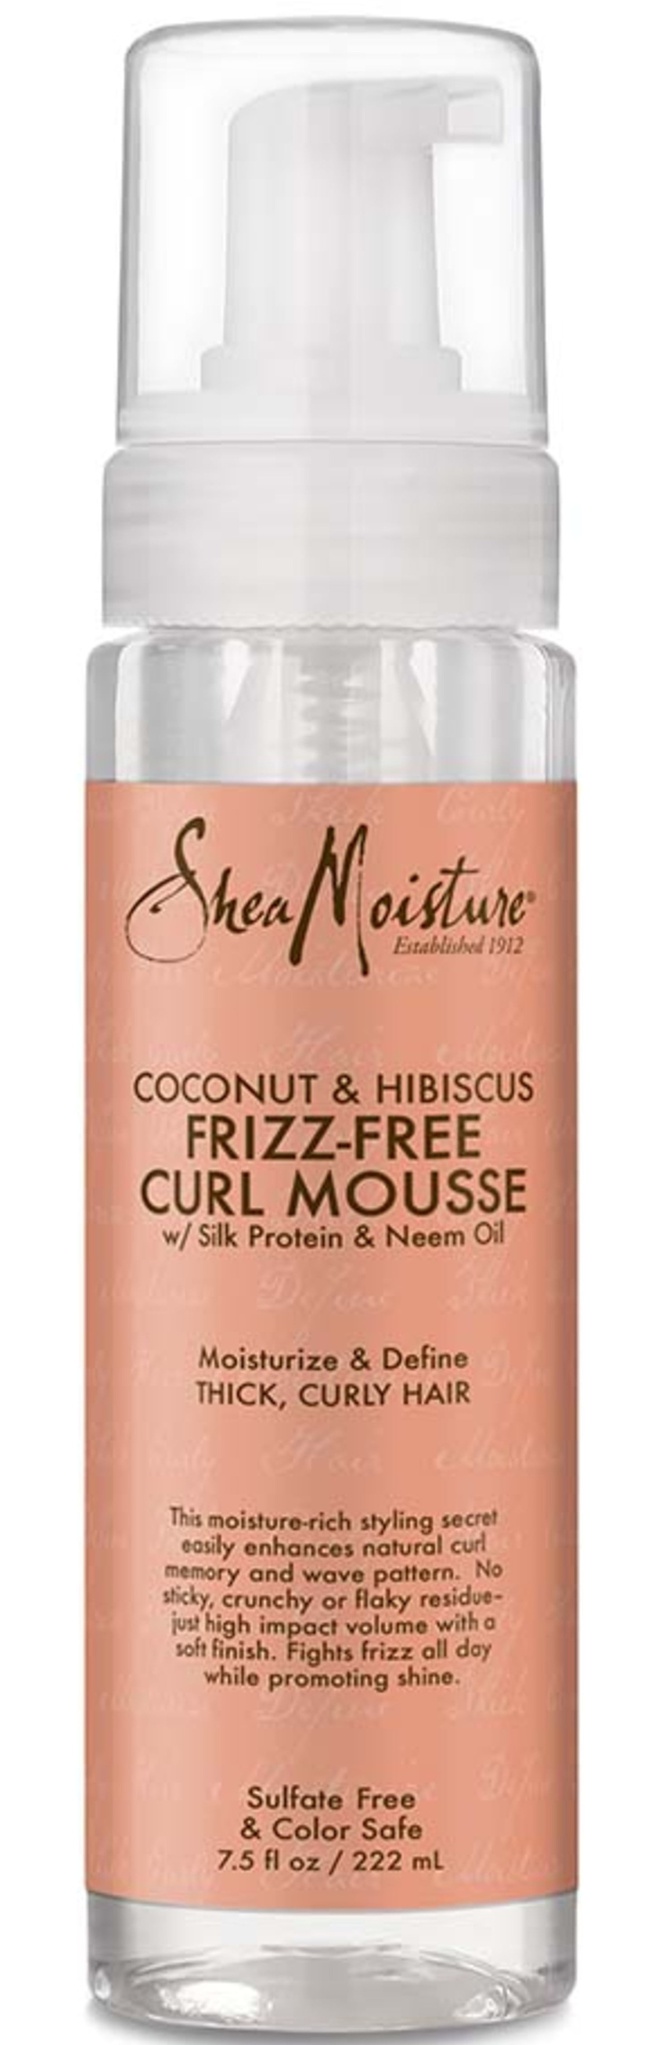 SheaMoisture Coconut & Hibiscus Frizz-free Curl Mousse